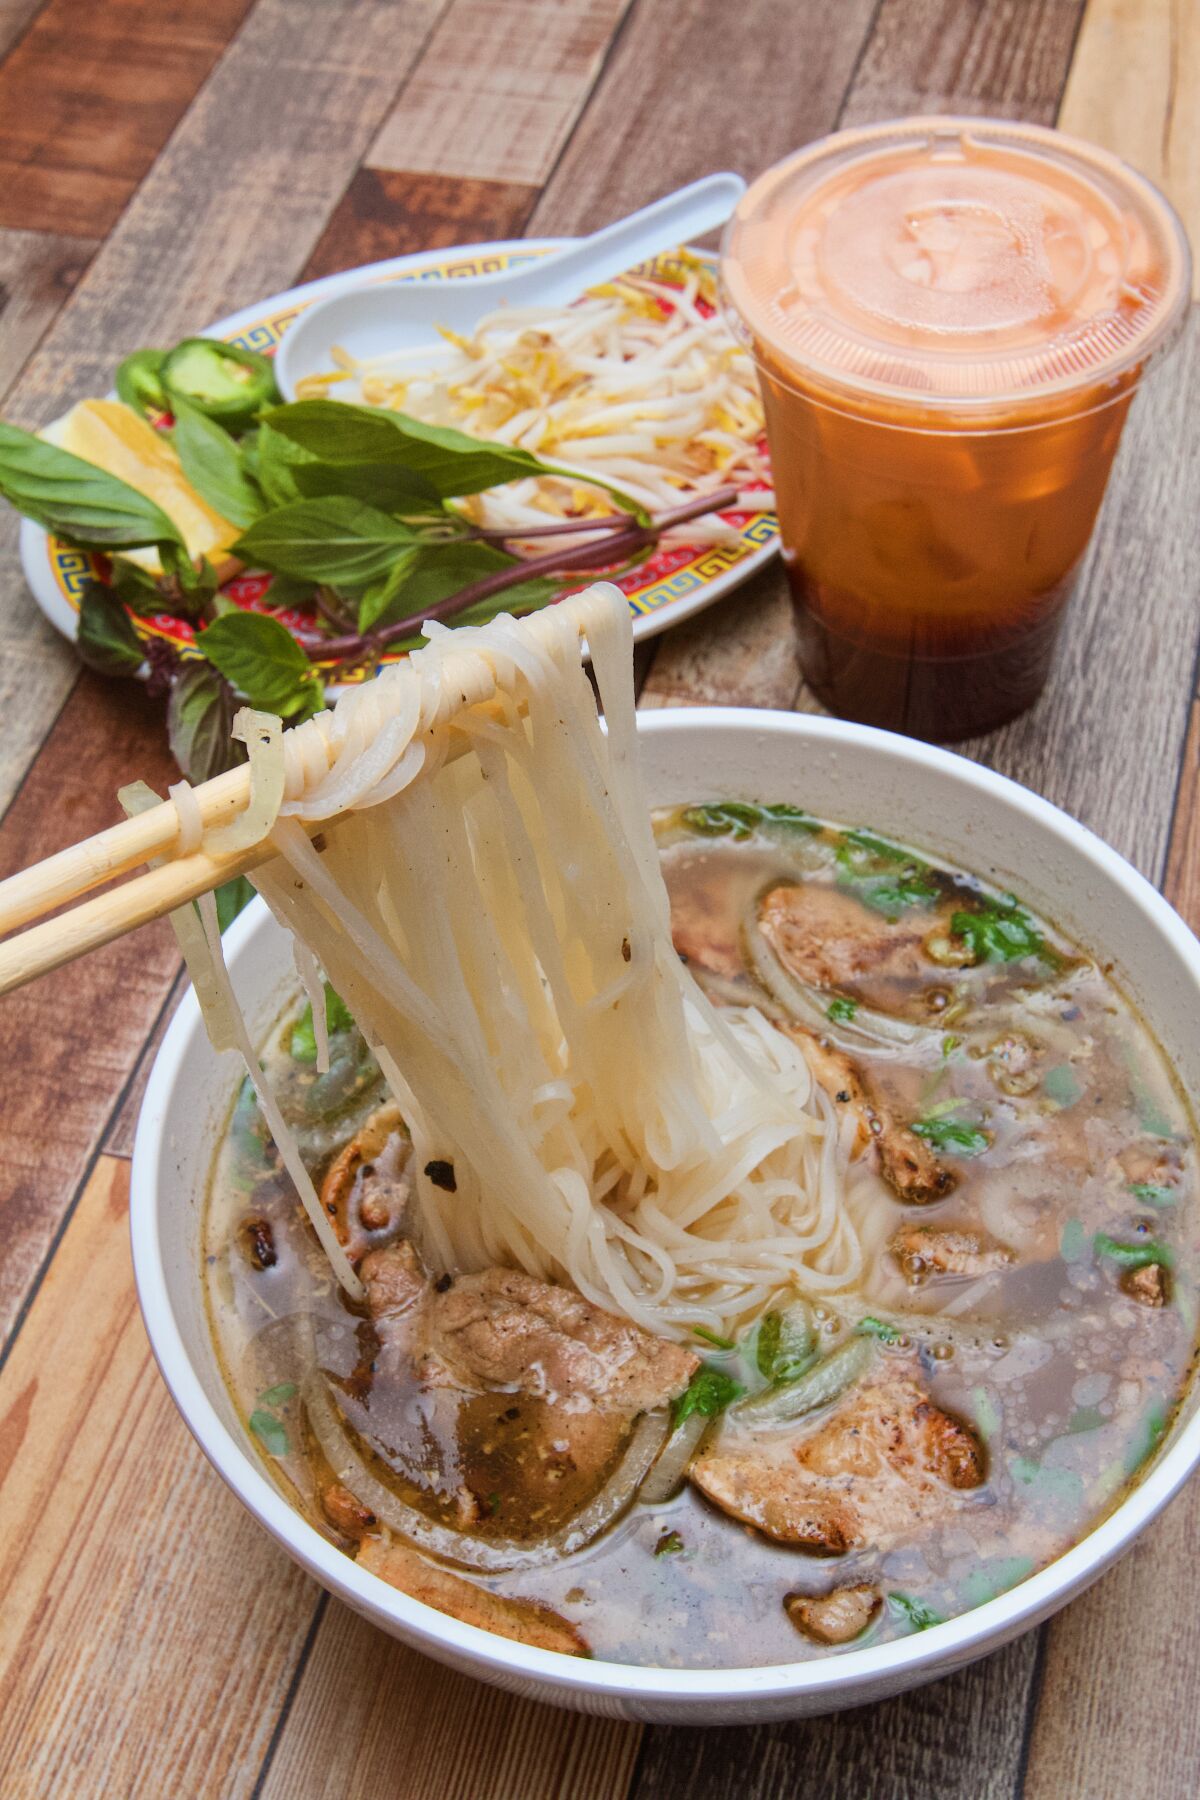 Chopsticks lift rice noodles from charred-pork pho. Behind is a cup of Thai iced tea and a plate of basil and bean sprouts.